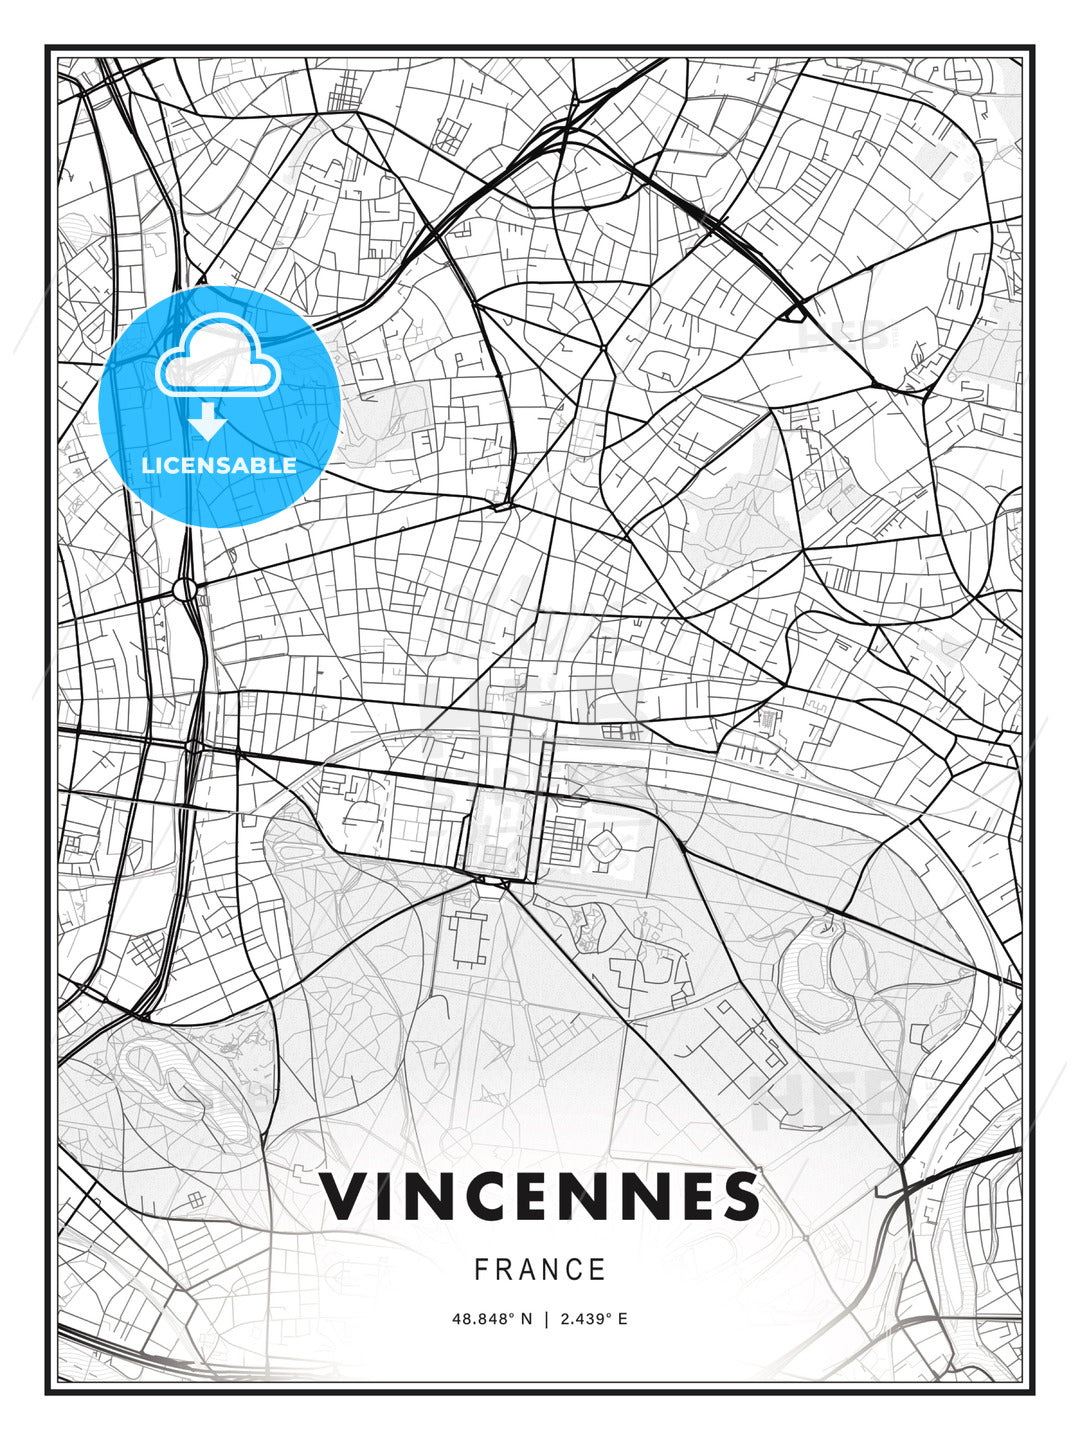 Vincennes, France, Modern Print Template in Various Formats - HEBSTREITS Sketches